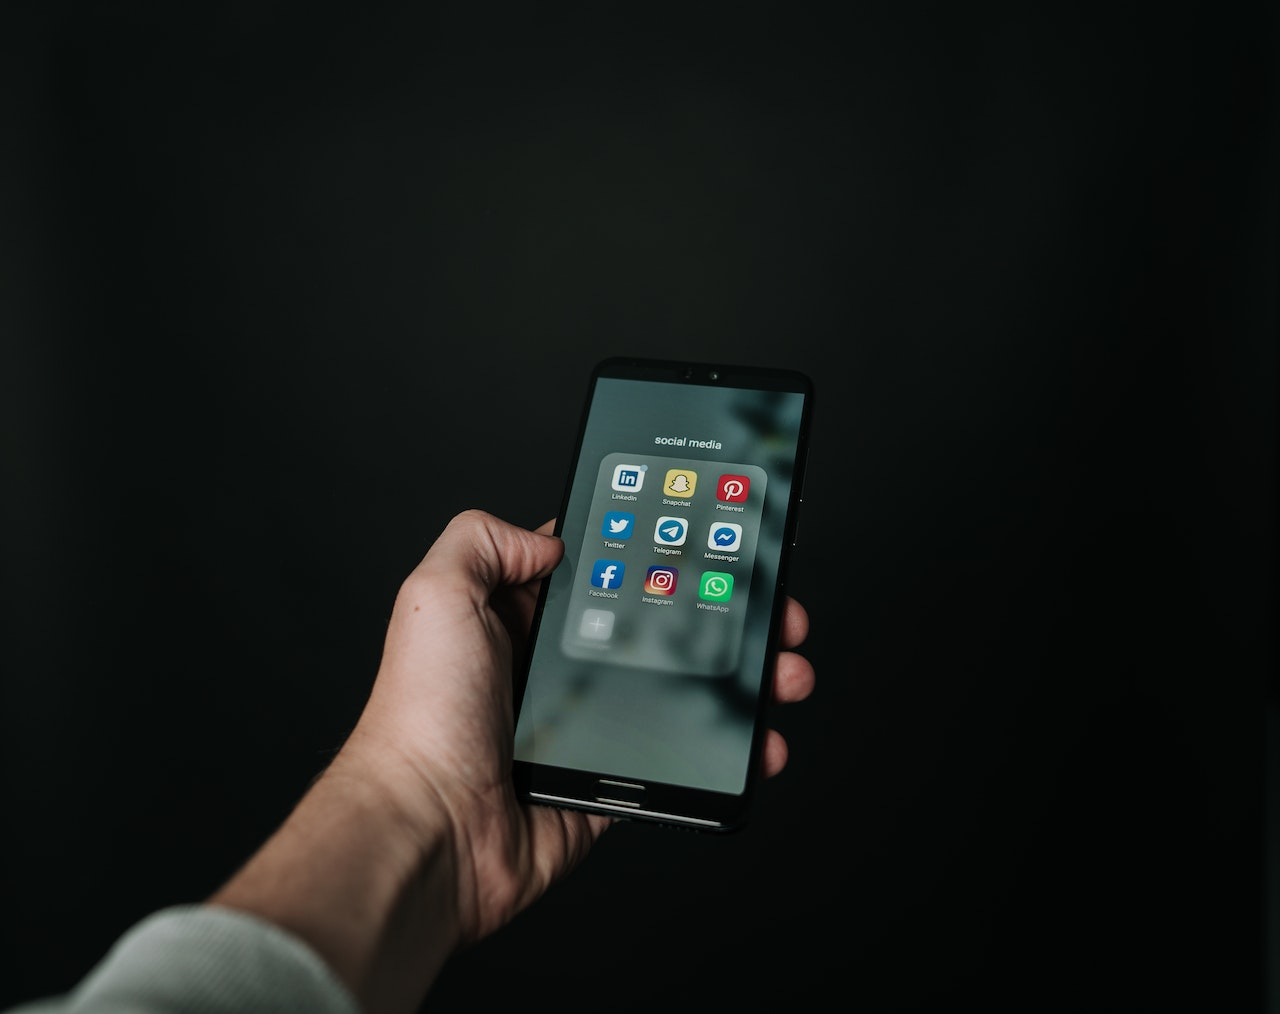 Photo by Magnus Mueller: https://www.pexels.com/photo/photo-of-hand-holding-a-black-smartphone-2818118/